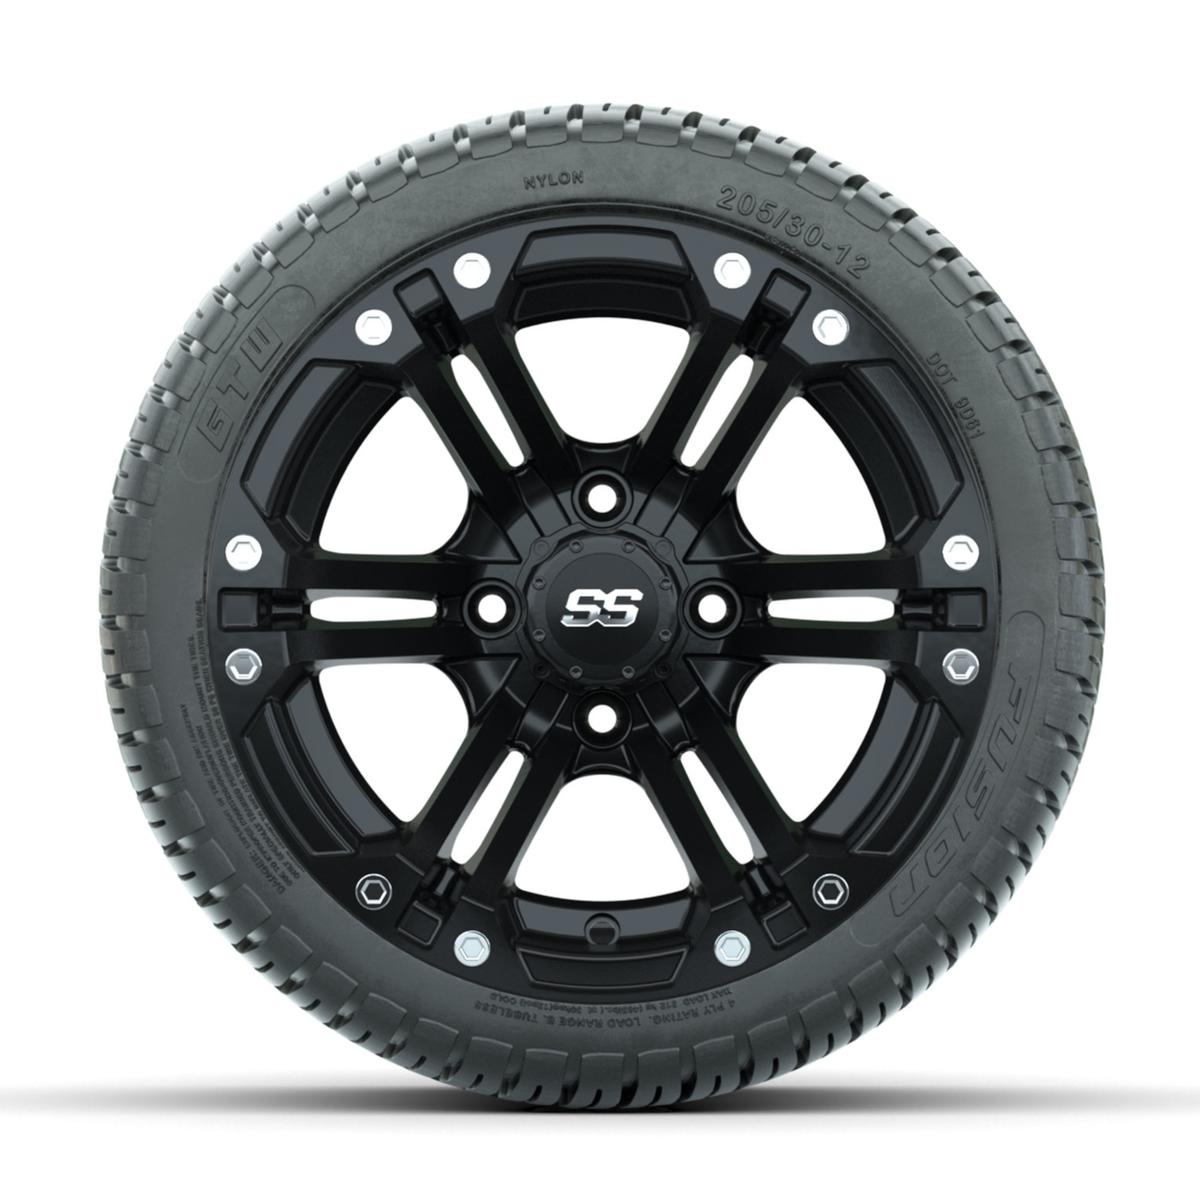 GTW Specter Matte Black 12 in Wheels with 205/30-12 Fusion Street Tires – Full Set